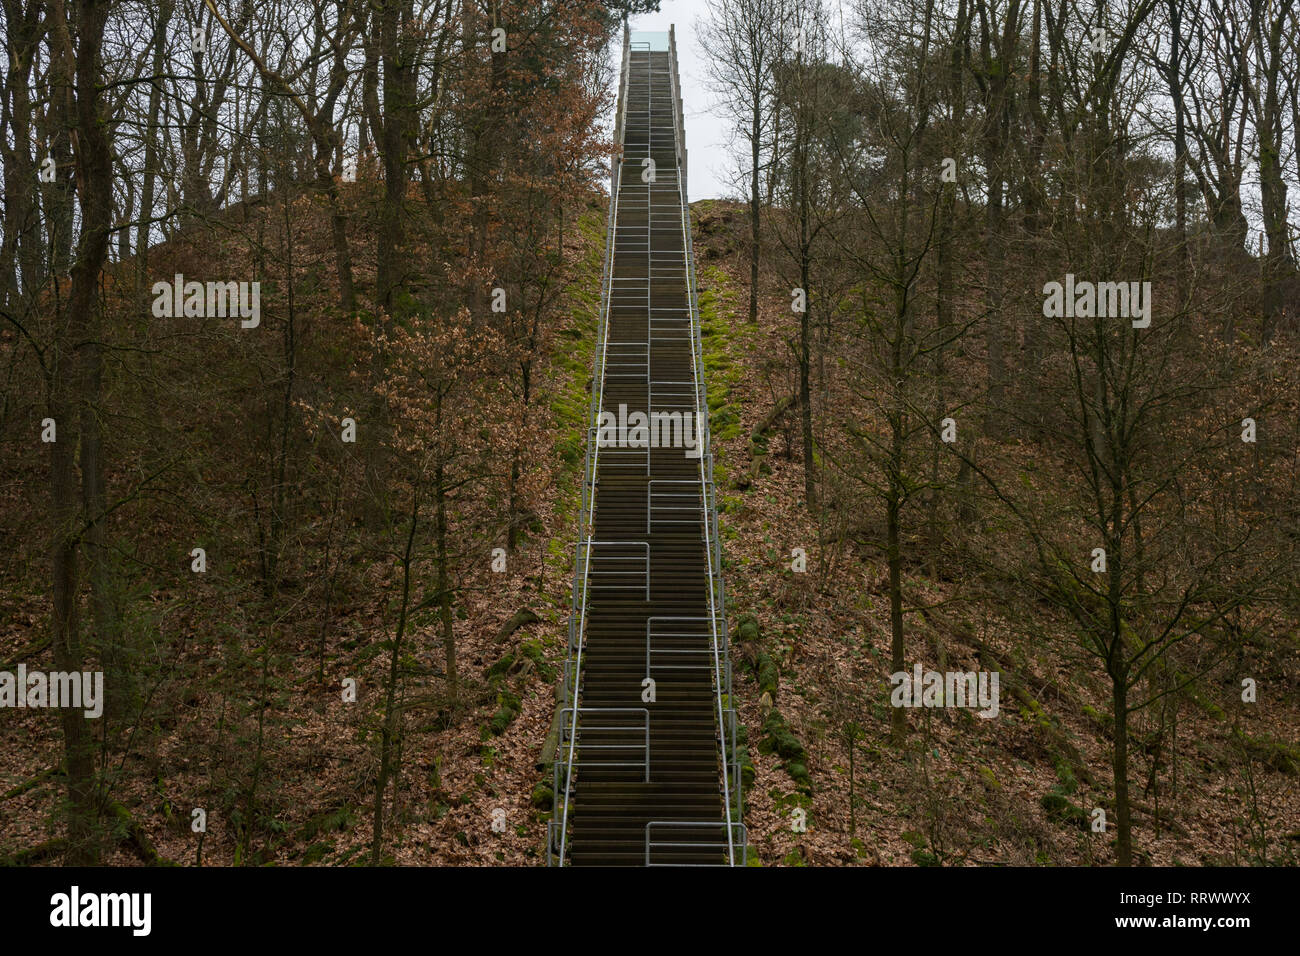 Super high stairway to heaven. Trought trees woods and leaves. Straight up one line outdoors staircase. Stock Photo